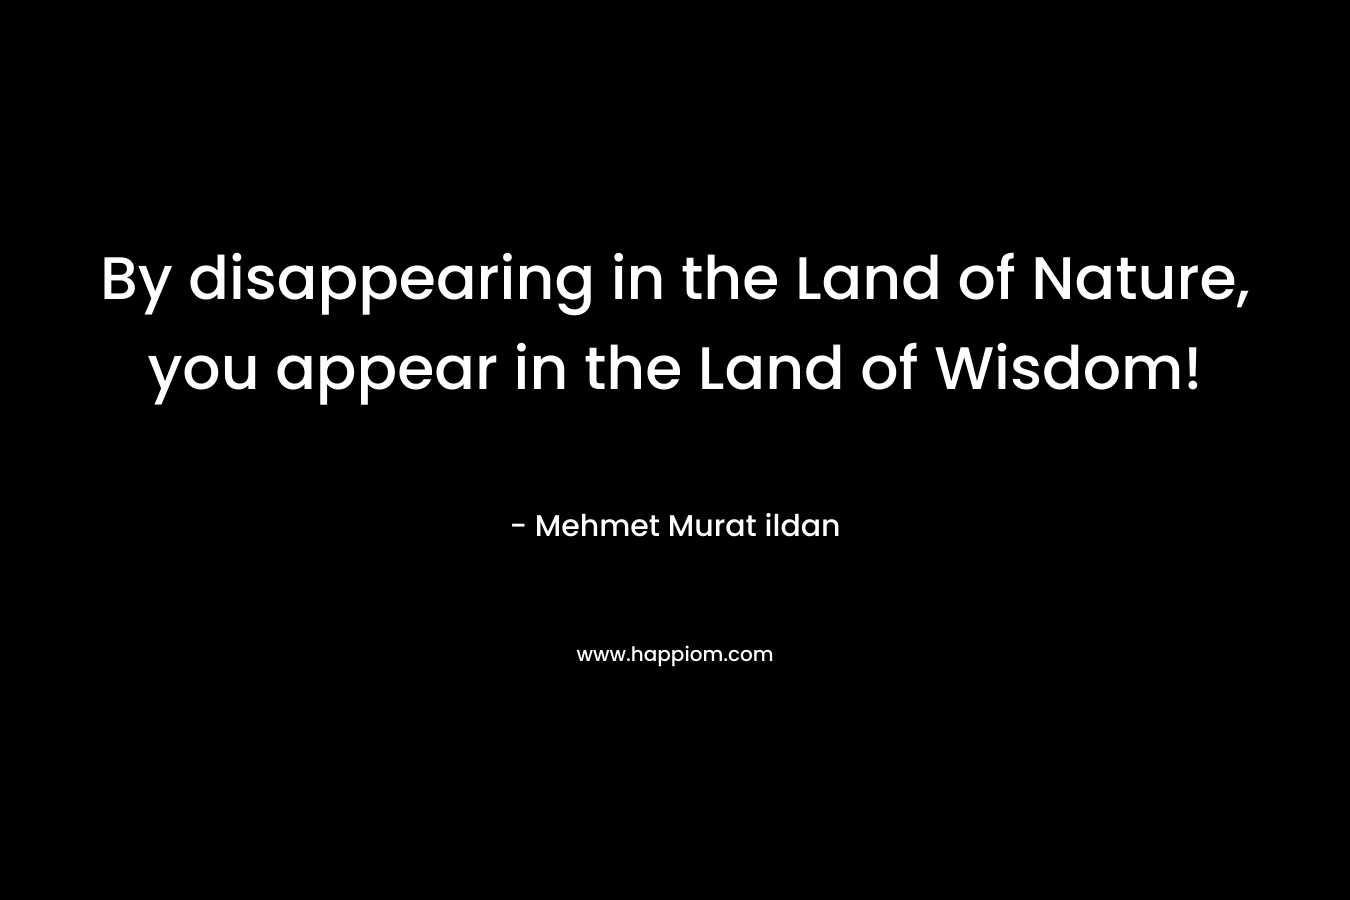 By disappearing in the Land of Nature, you appear in the Land of Wisdom!